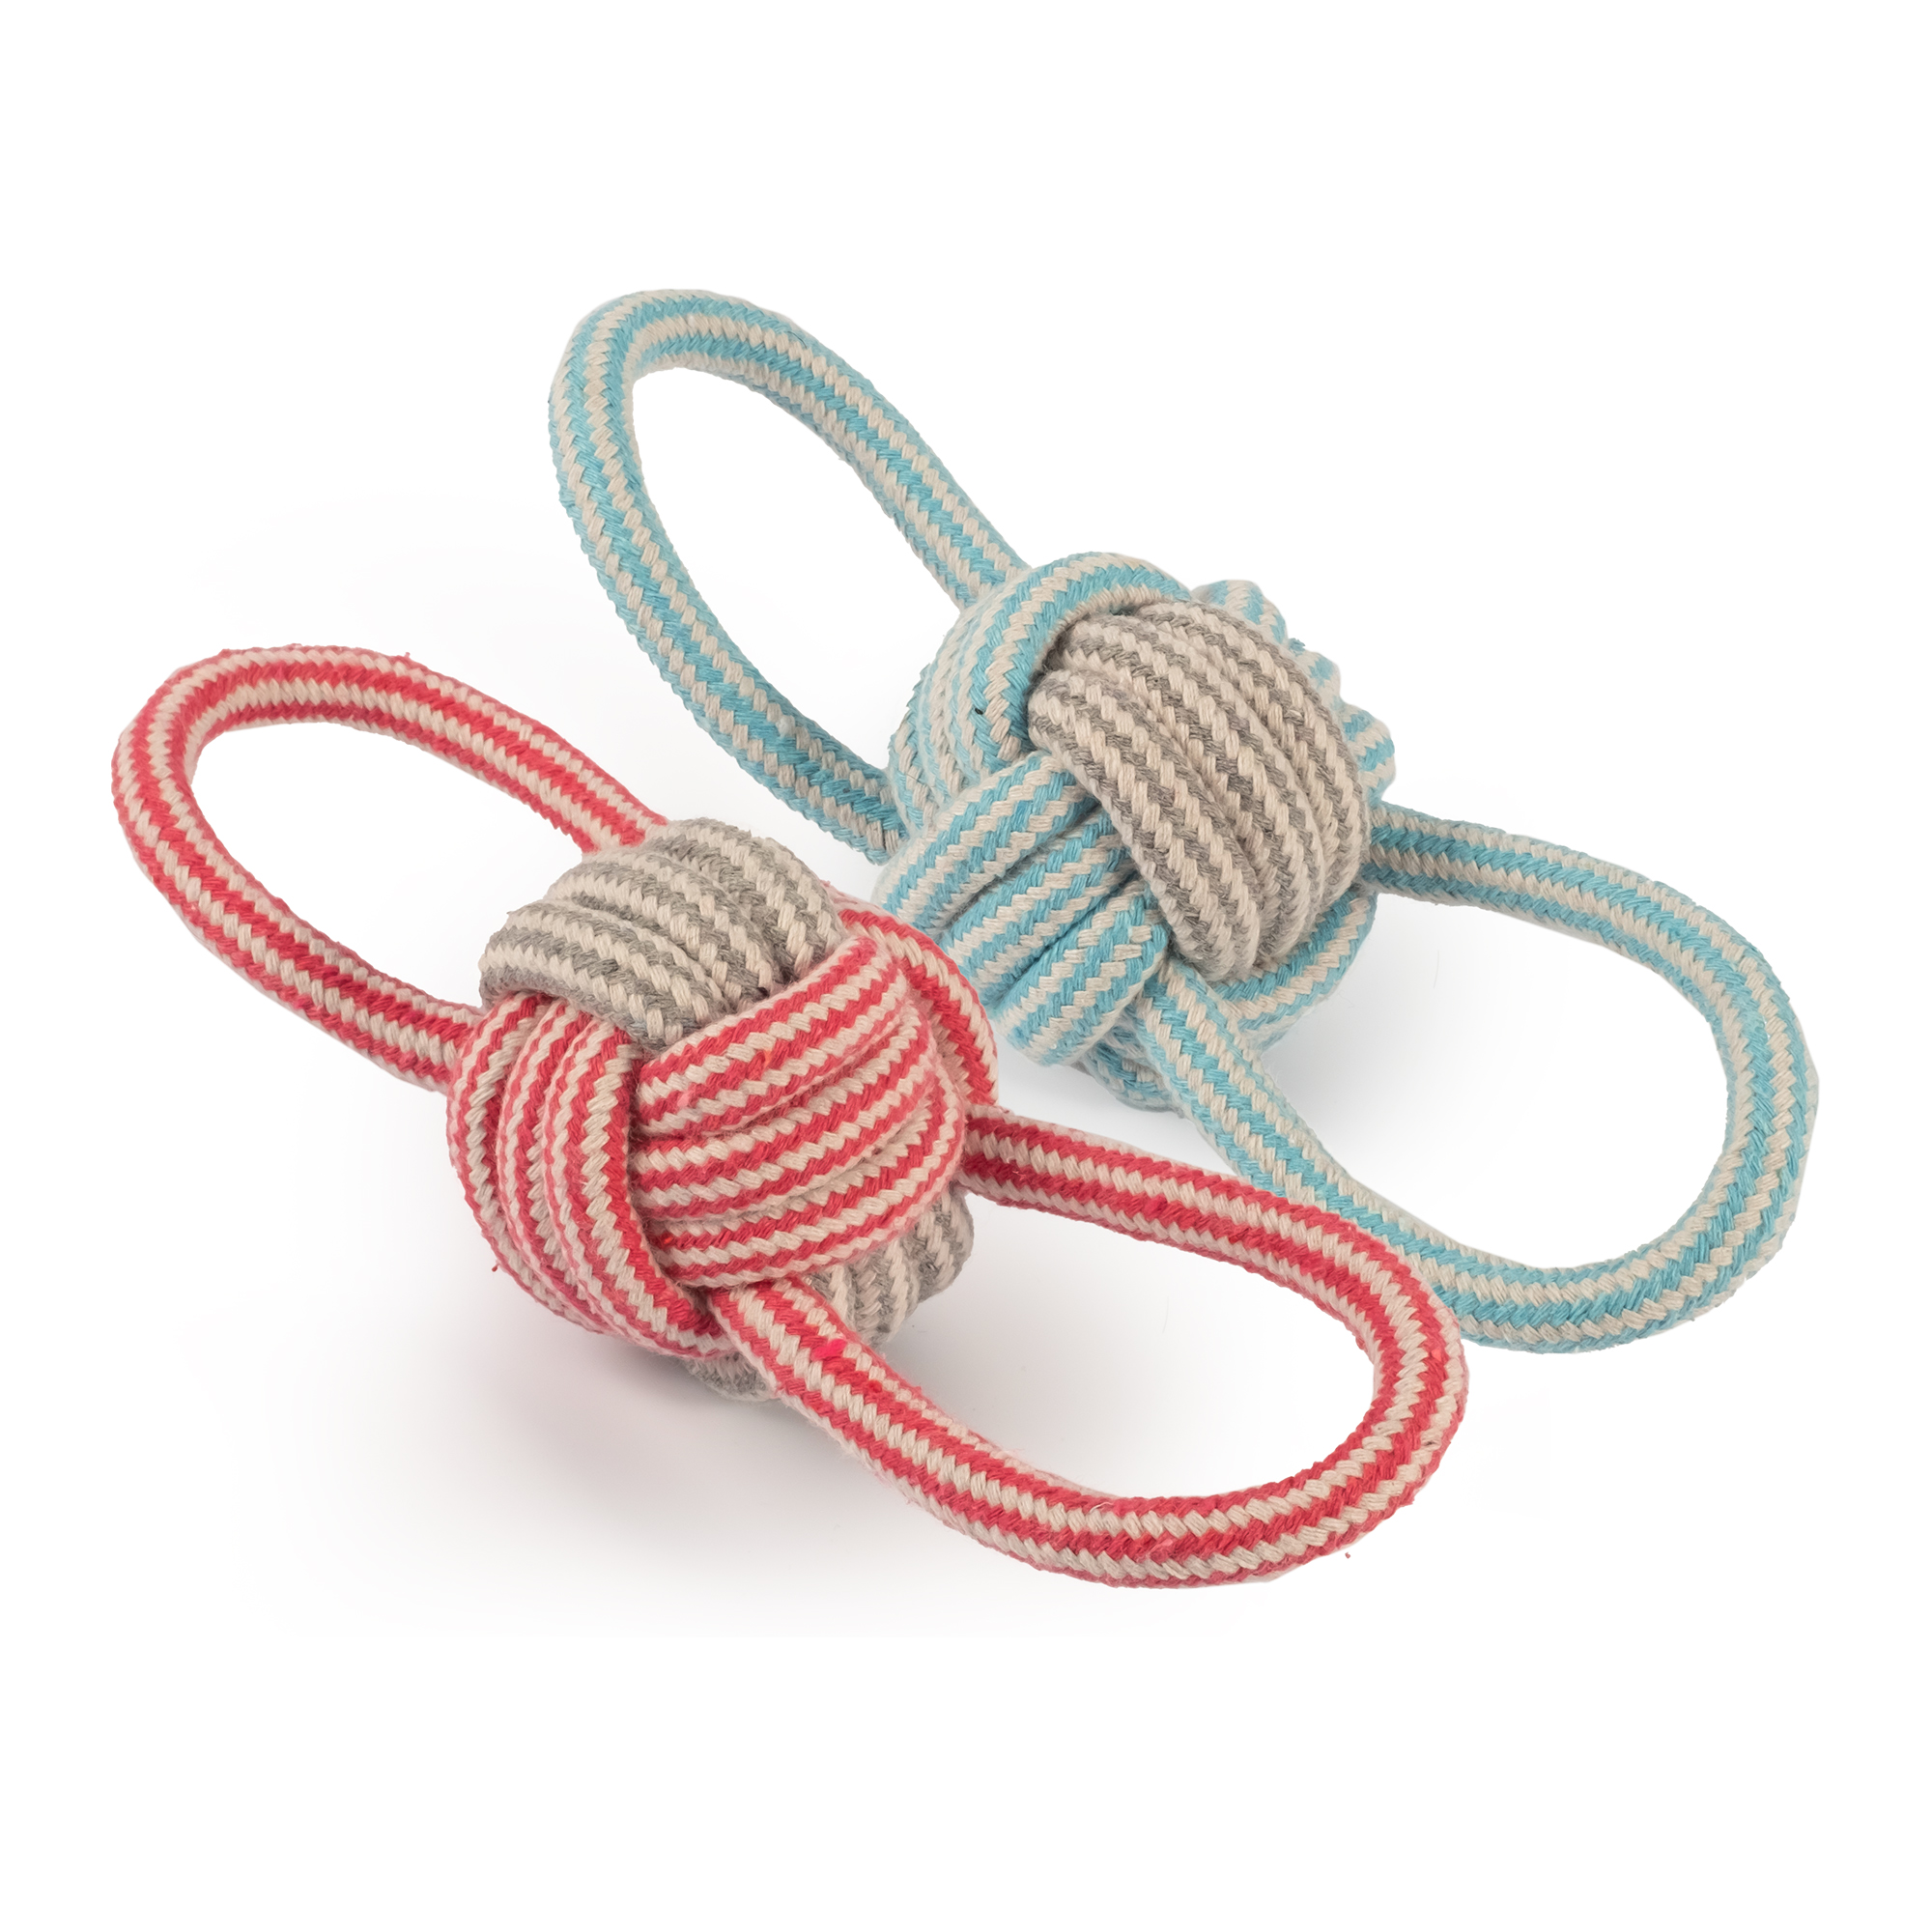 Rope & Tugging Toys